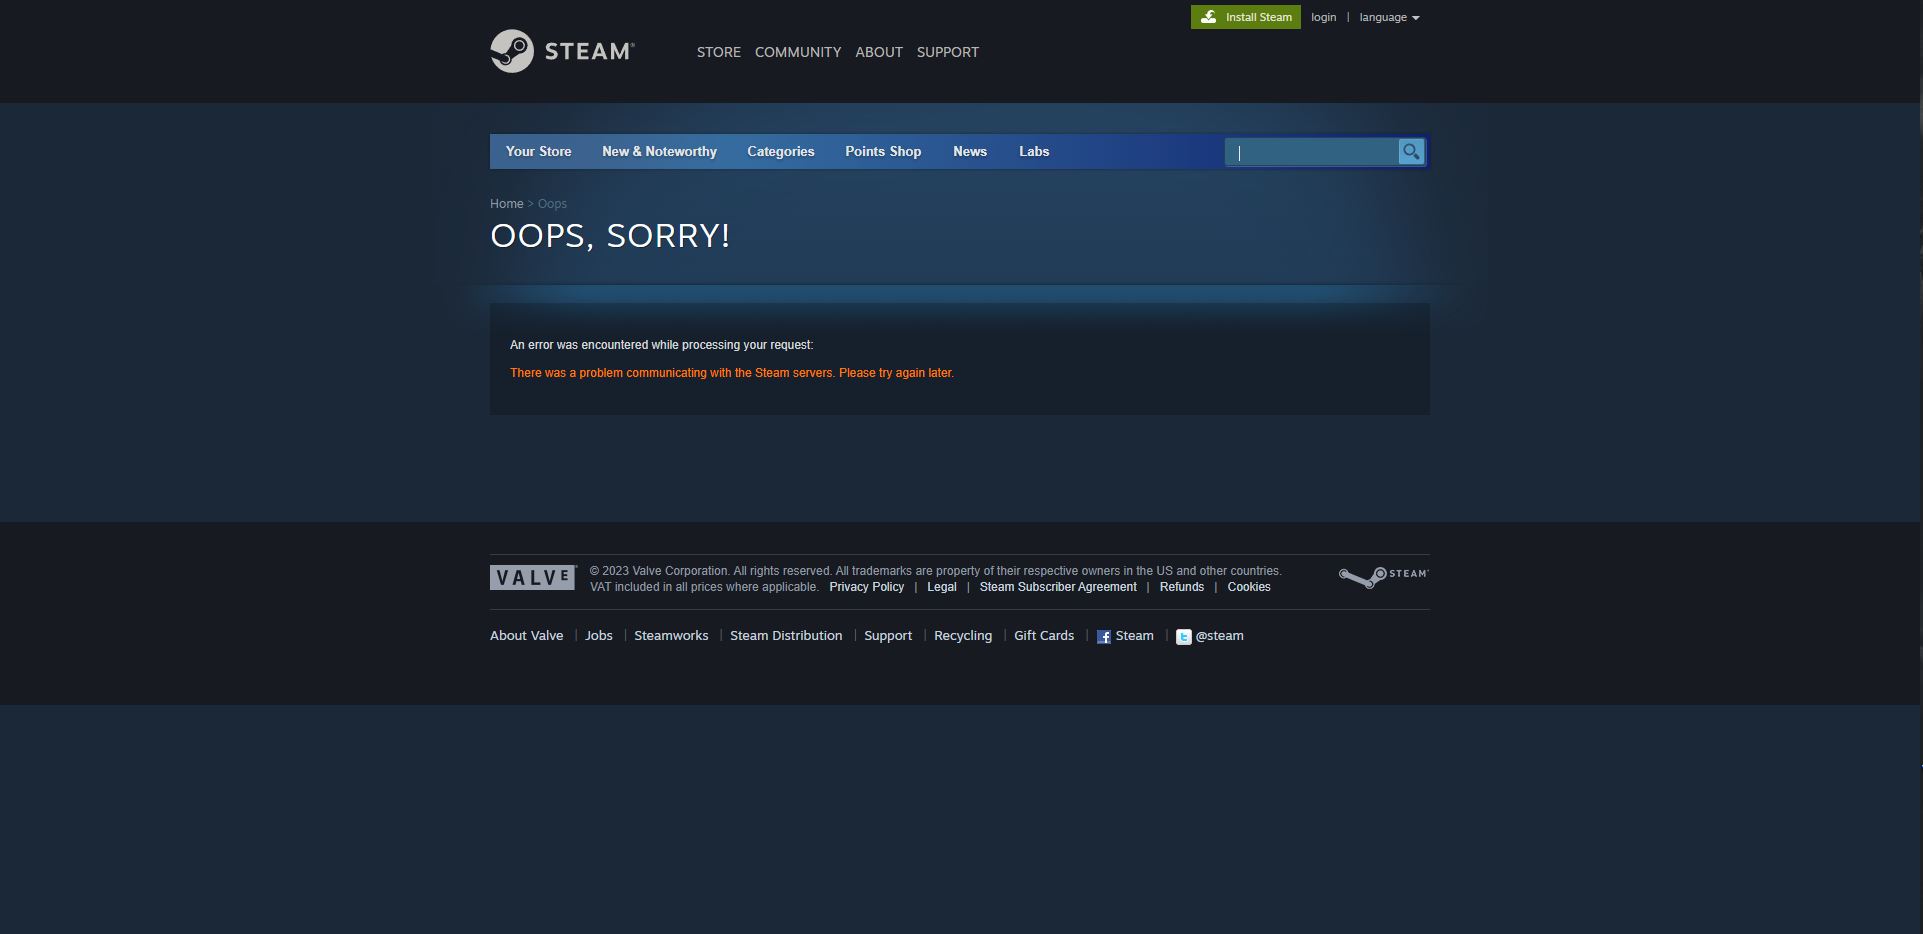 Unable to access steam please ensure that steam is running and you are logged in фото 55